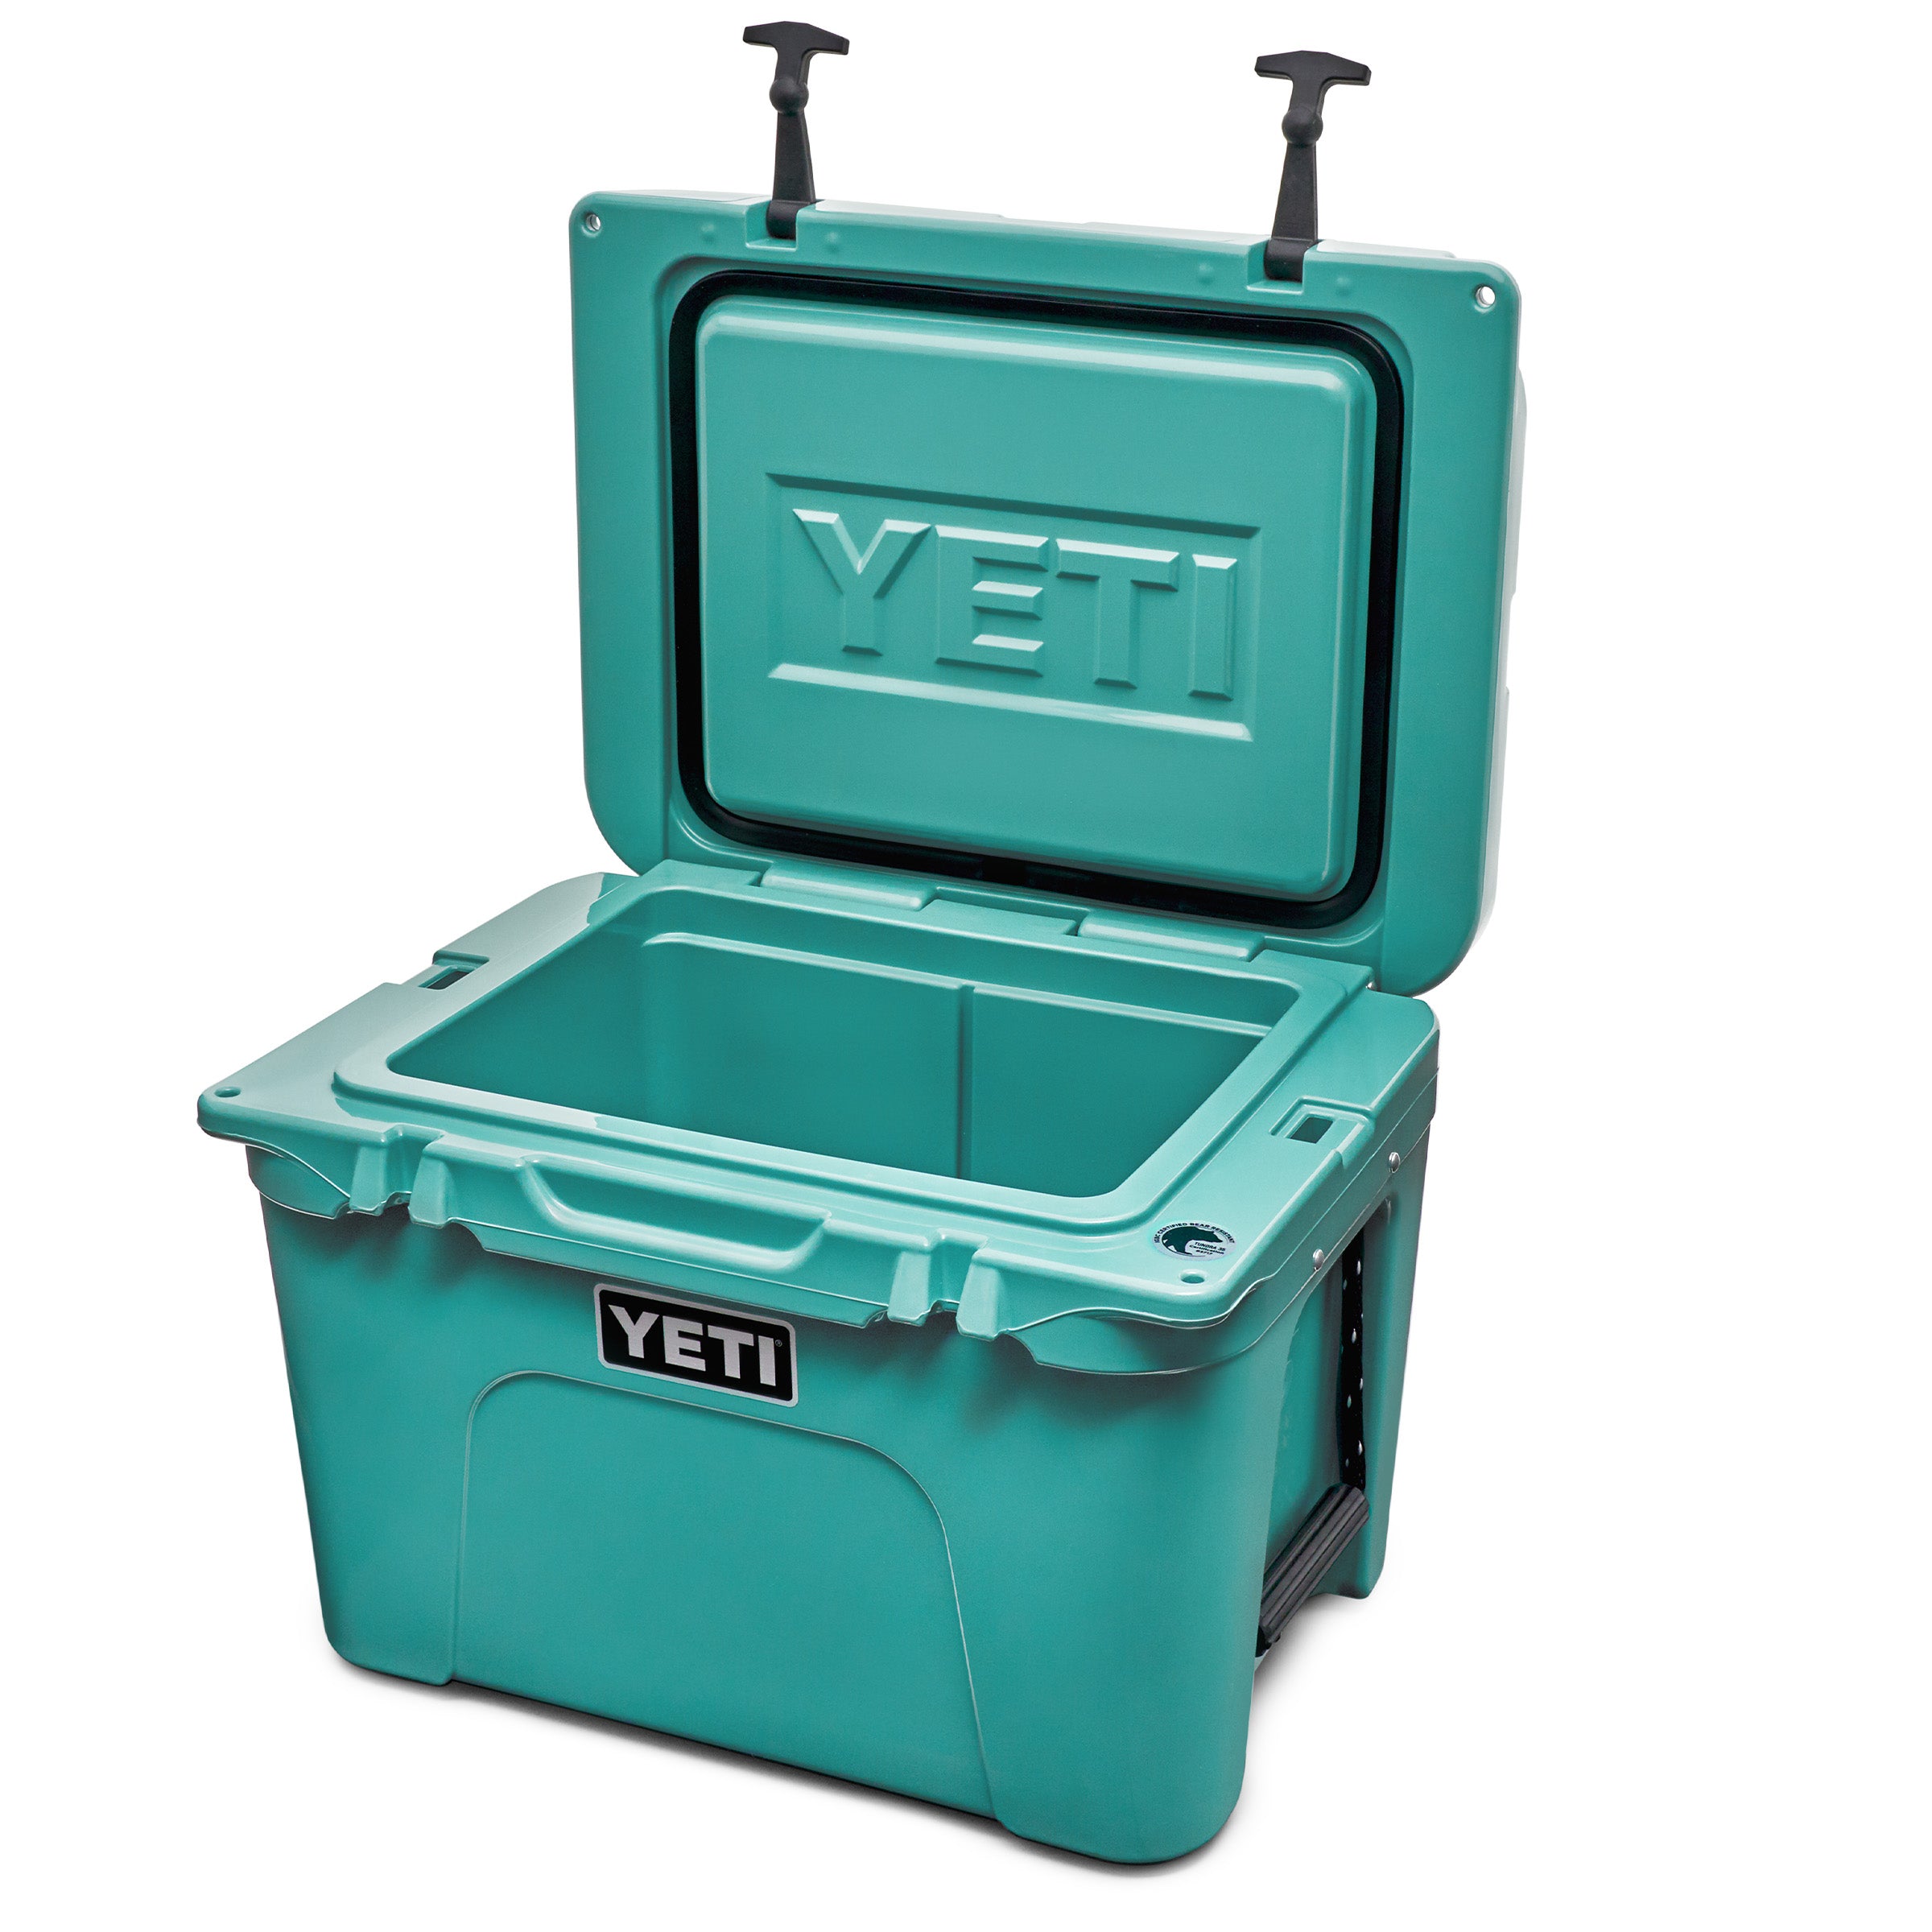 YETI Daytrip Lunch Box, Aquifer Blue in the Portable Coolers department at